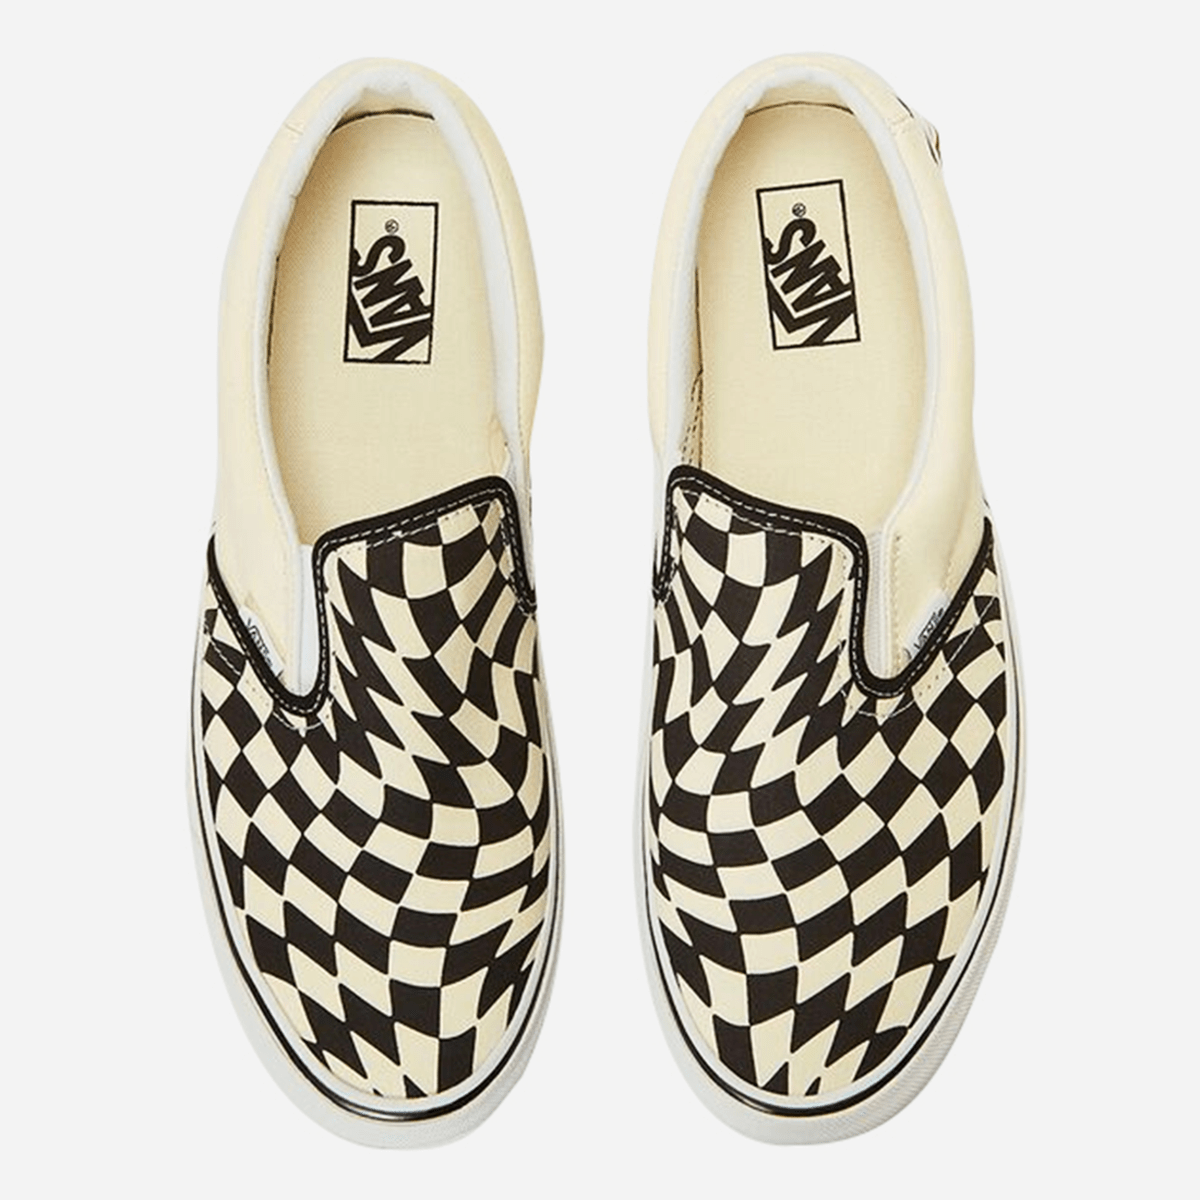 The Vans Checkerboard Gets a Twisted Remix - Airows